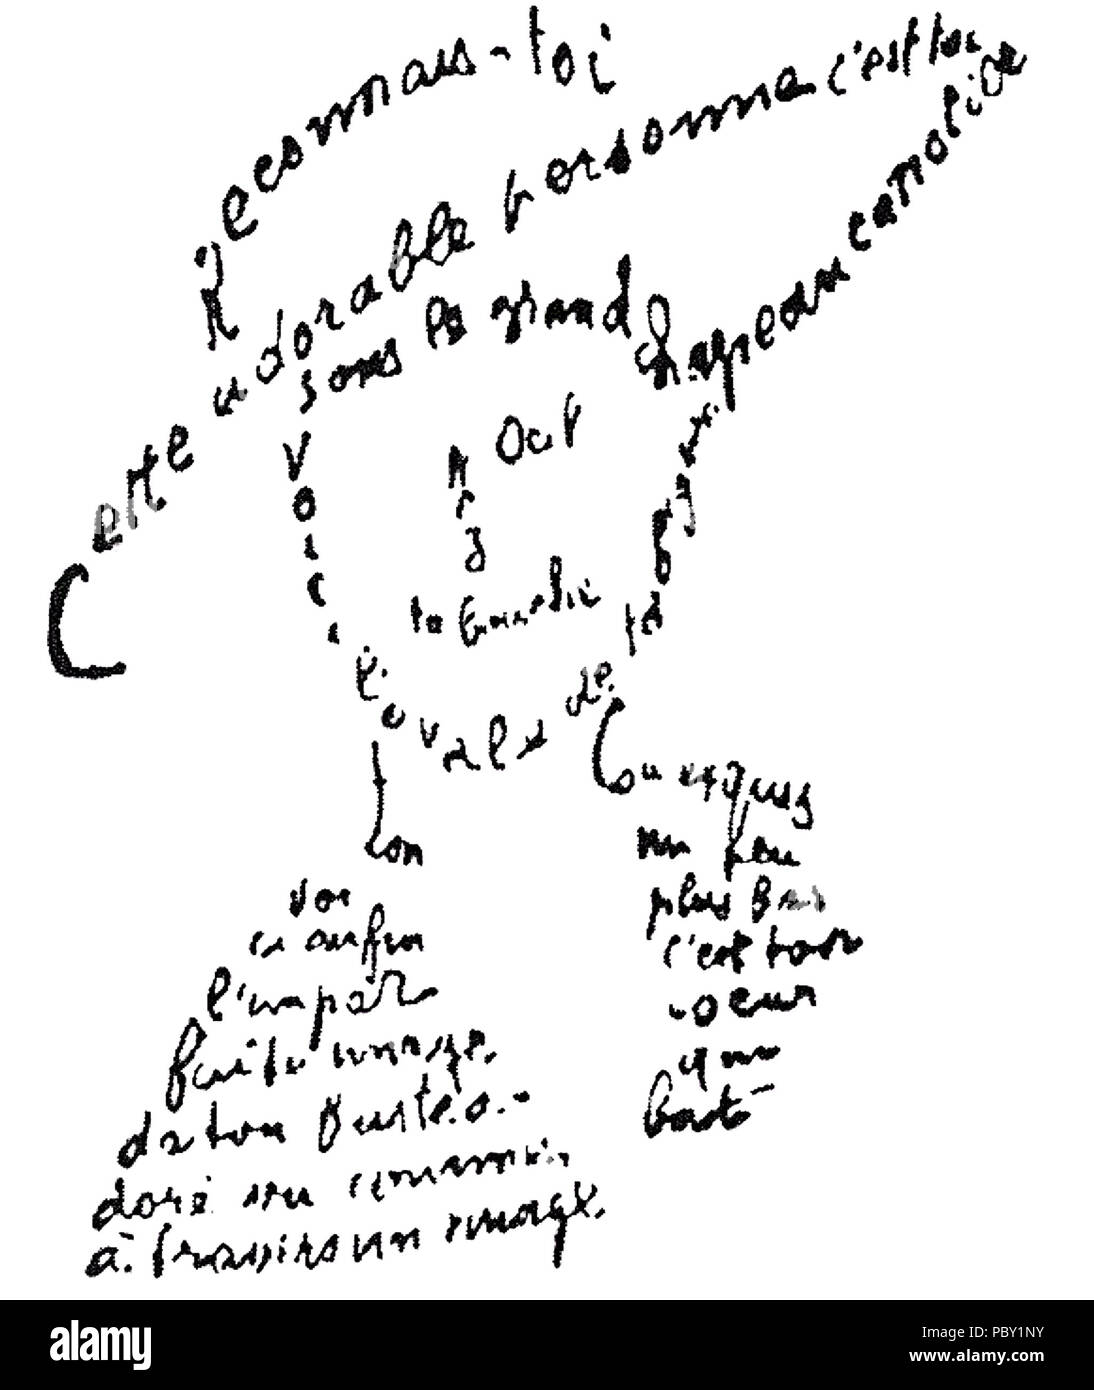 calligramme voyage apollinaire commentaire